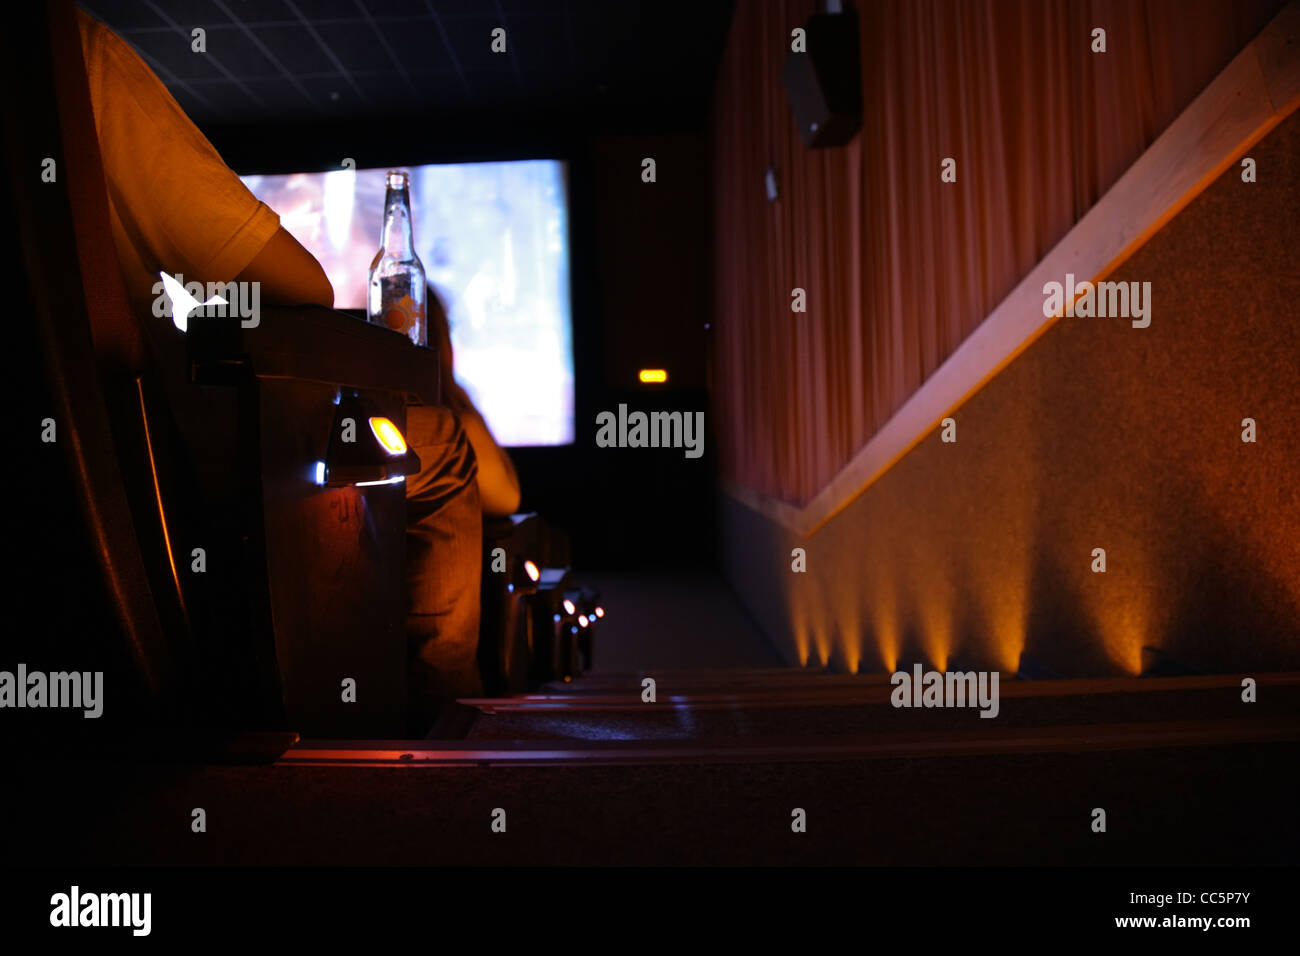 Behind spectator in cinema with bottle, focus on hand Stock Photo